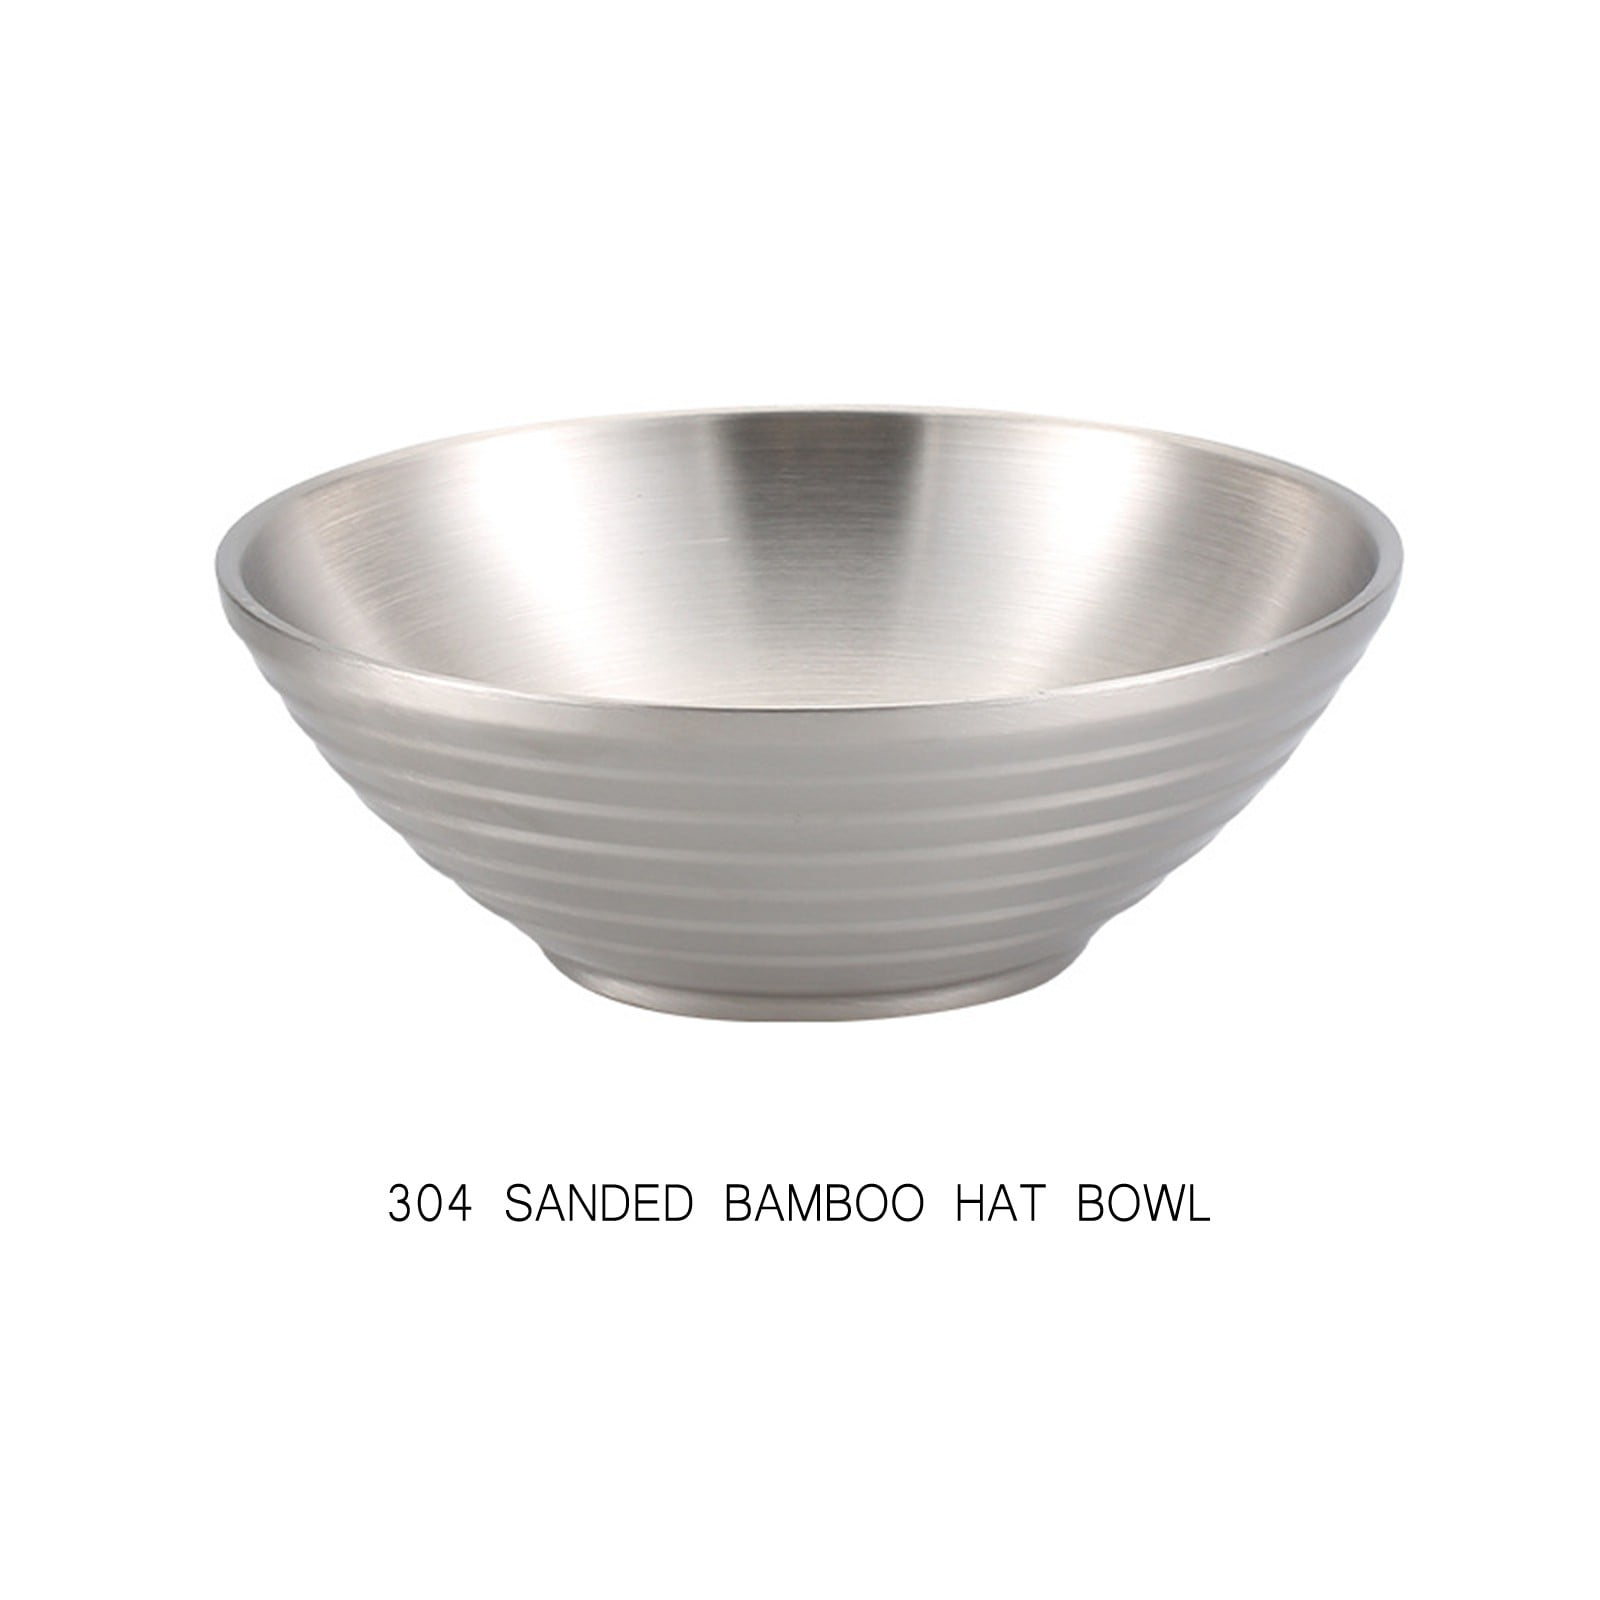 10 Pack Stainless Steel Bowls, 13 Oz Insulated Soup Bowls Snacks Bowls  Lightweight Salad Bowls,304 Double-walled Metal Bowls Serving Dishes for